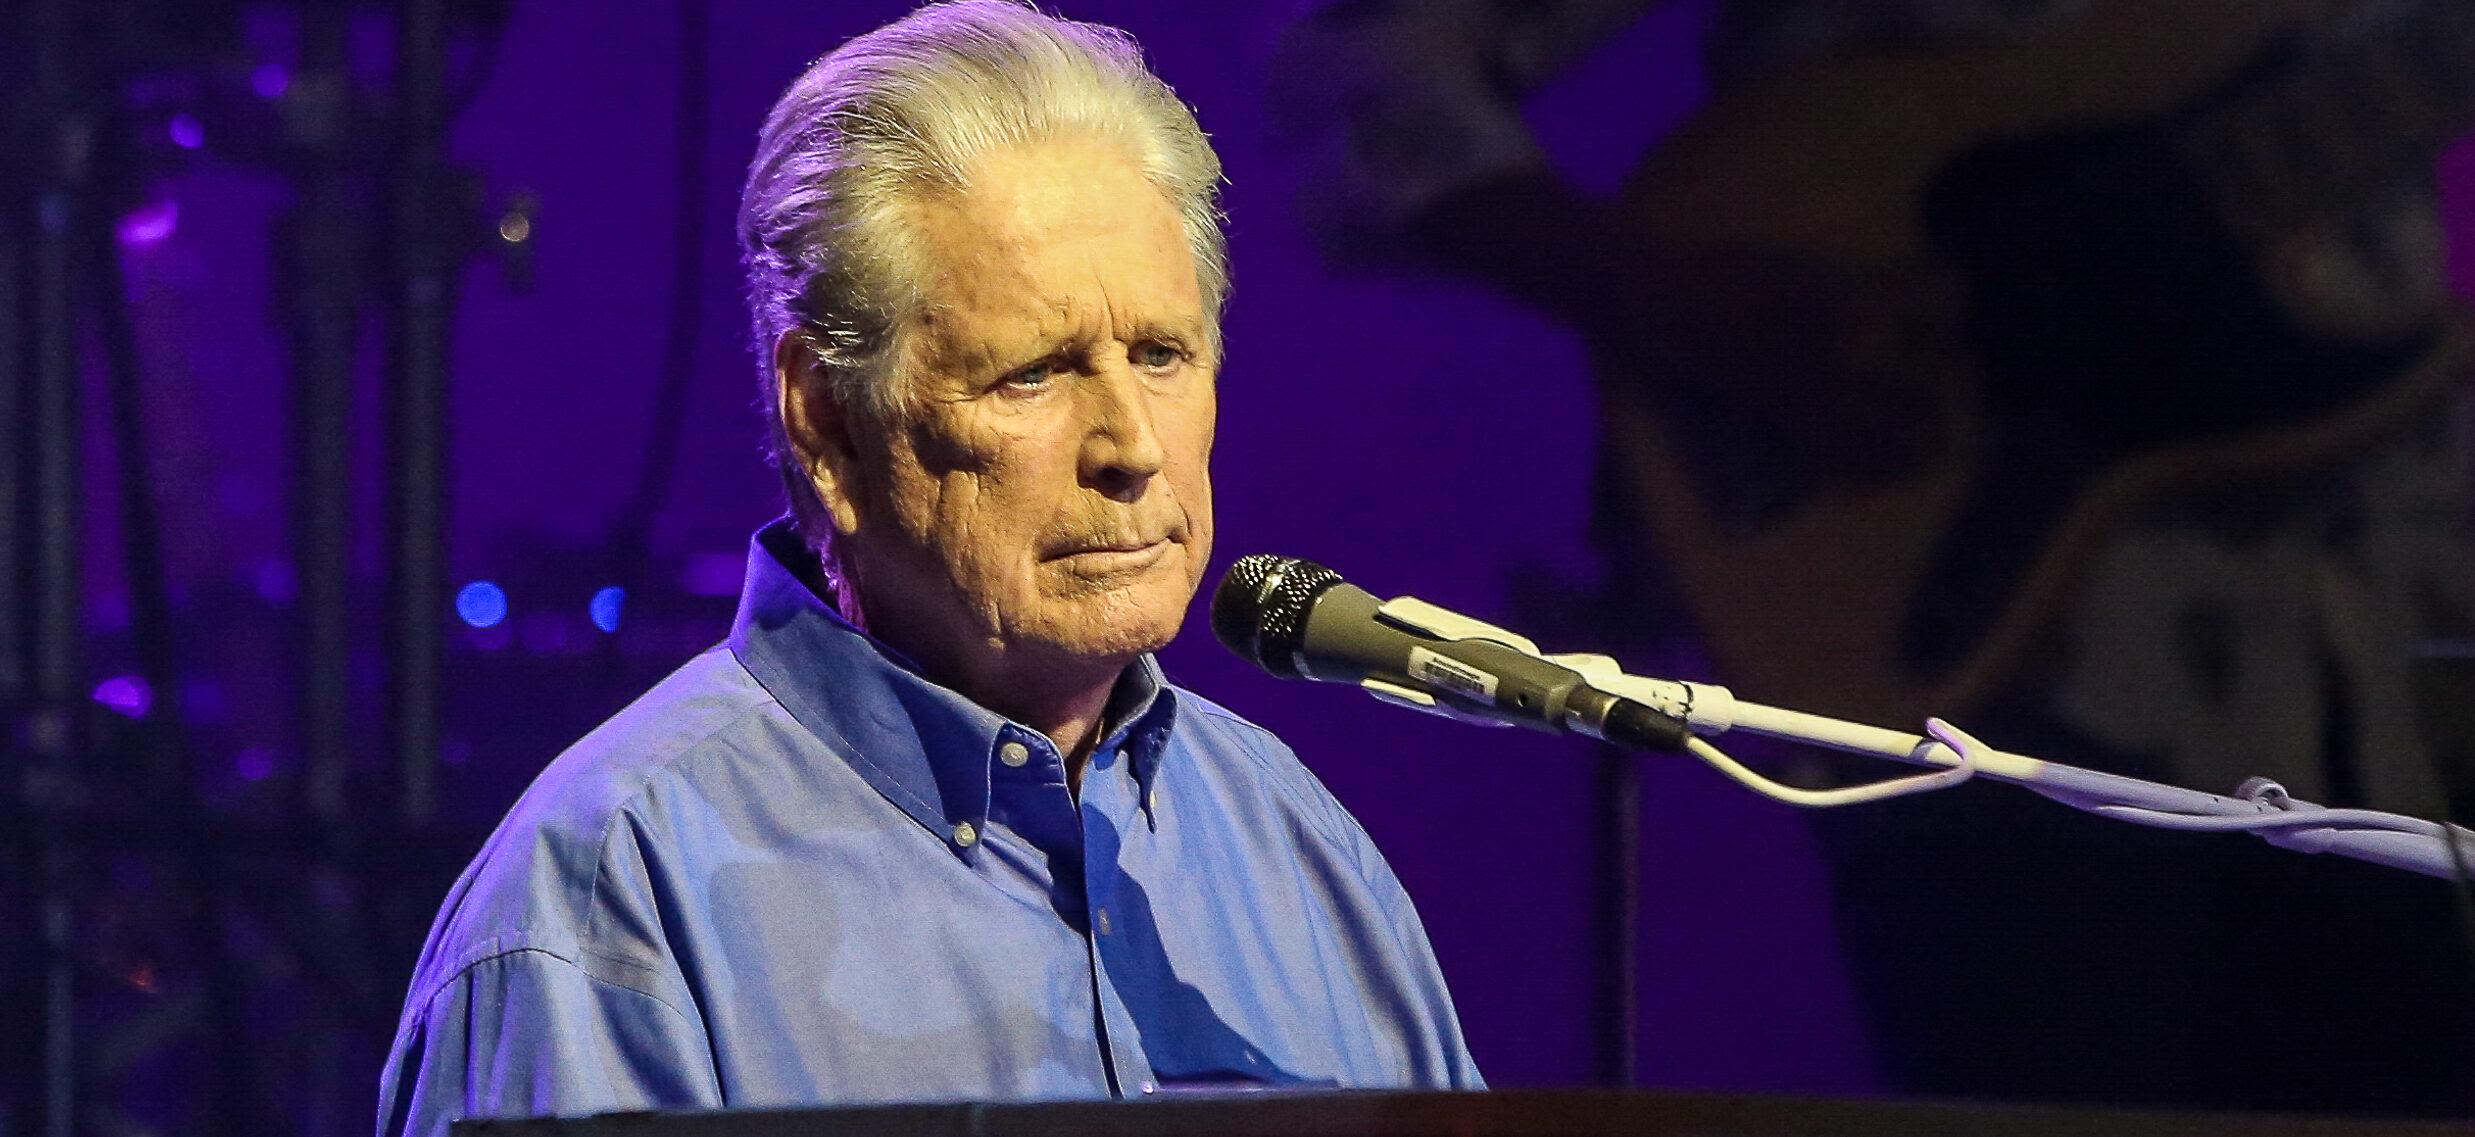 Brian Wilson's Minor Kids Set To Be Appointed Guardians Following His Conservatorship